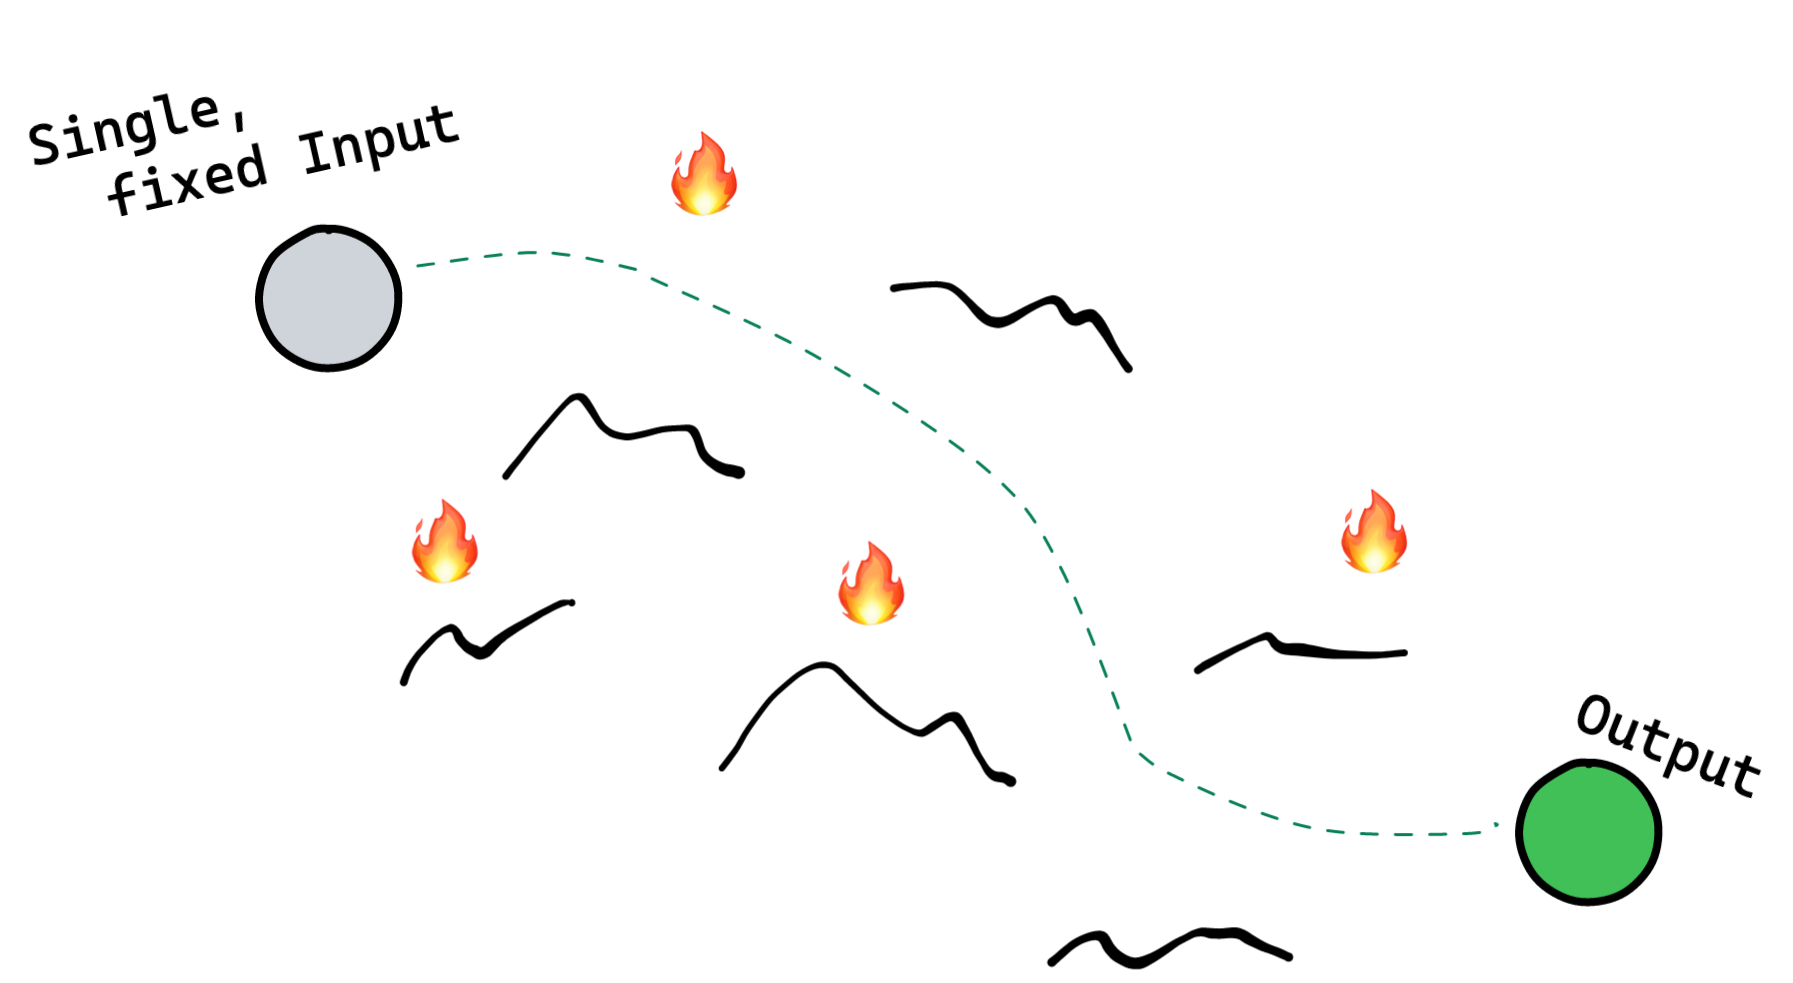 Path between an input point and output point with fire and mountains either side